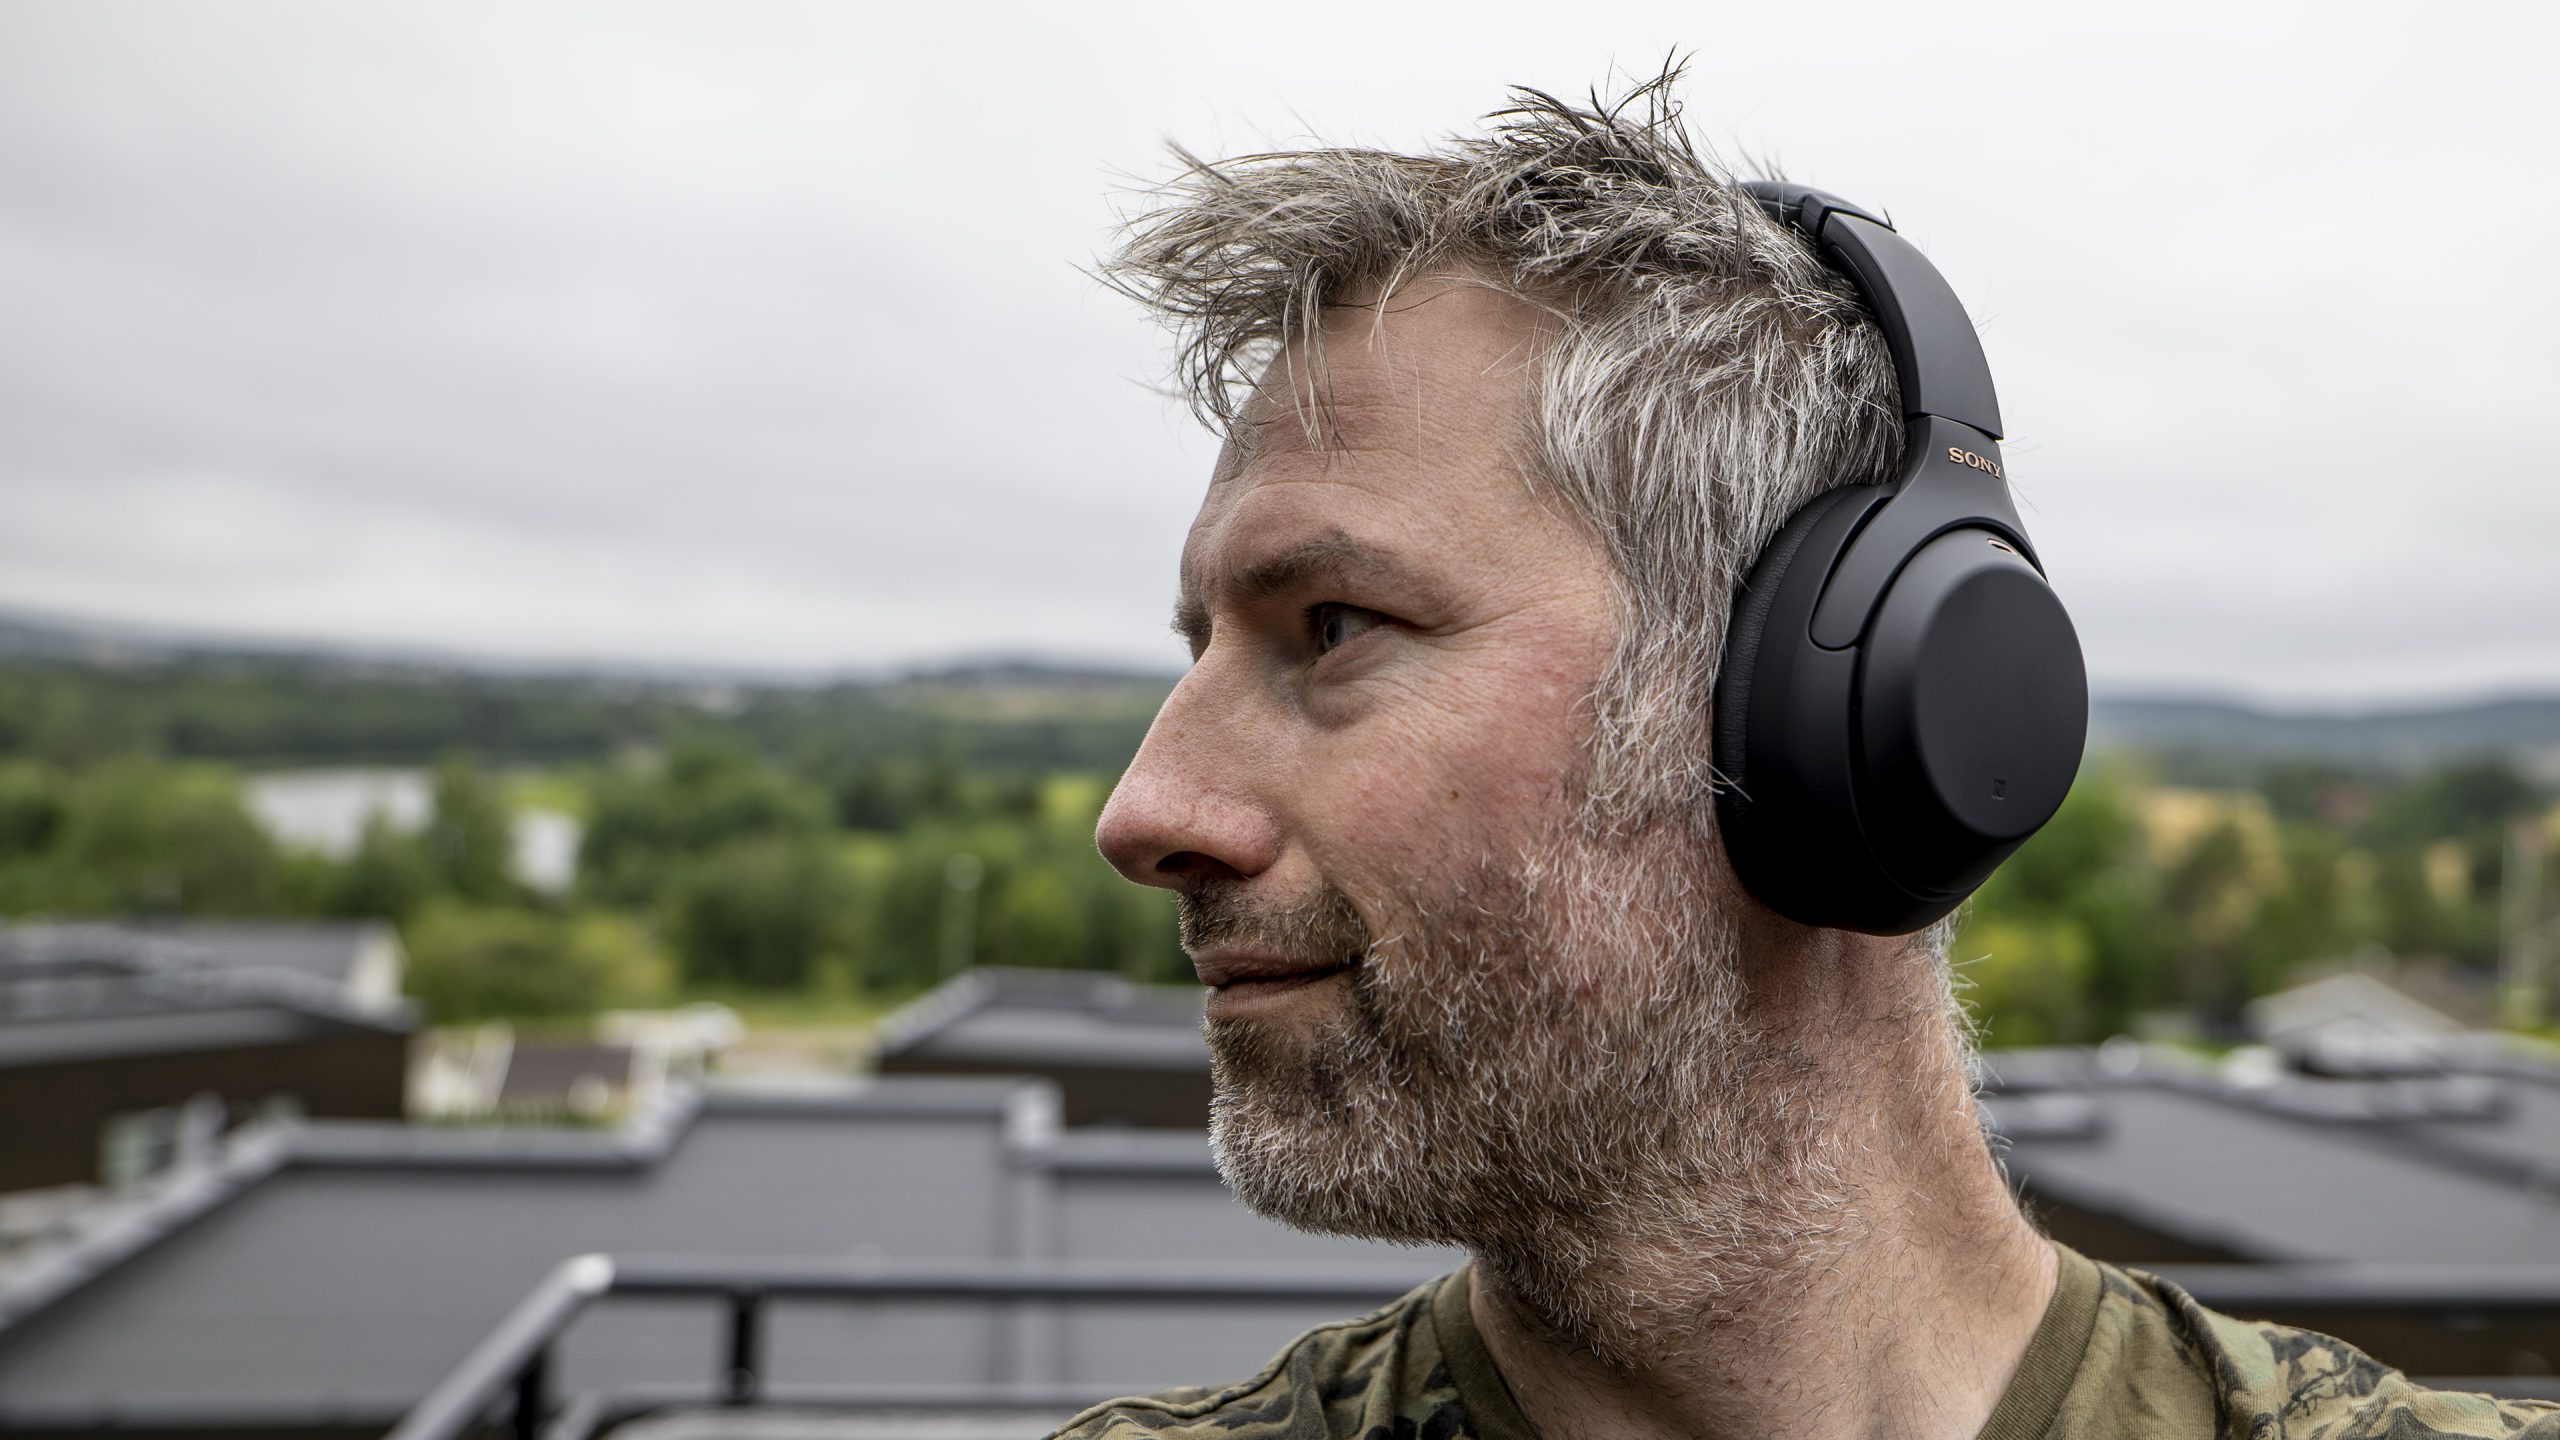 Review: Sony WH-1000XM4 - The New King Of Noise Cancelling